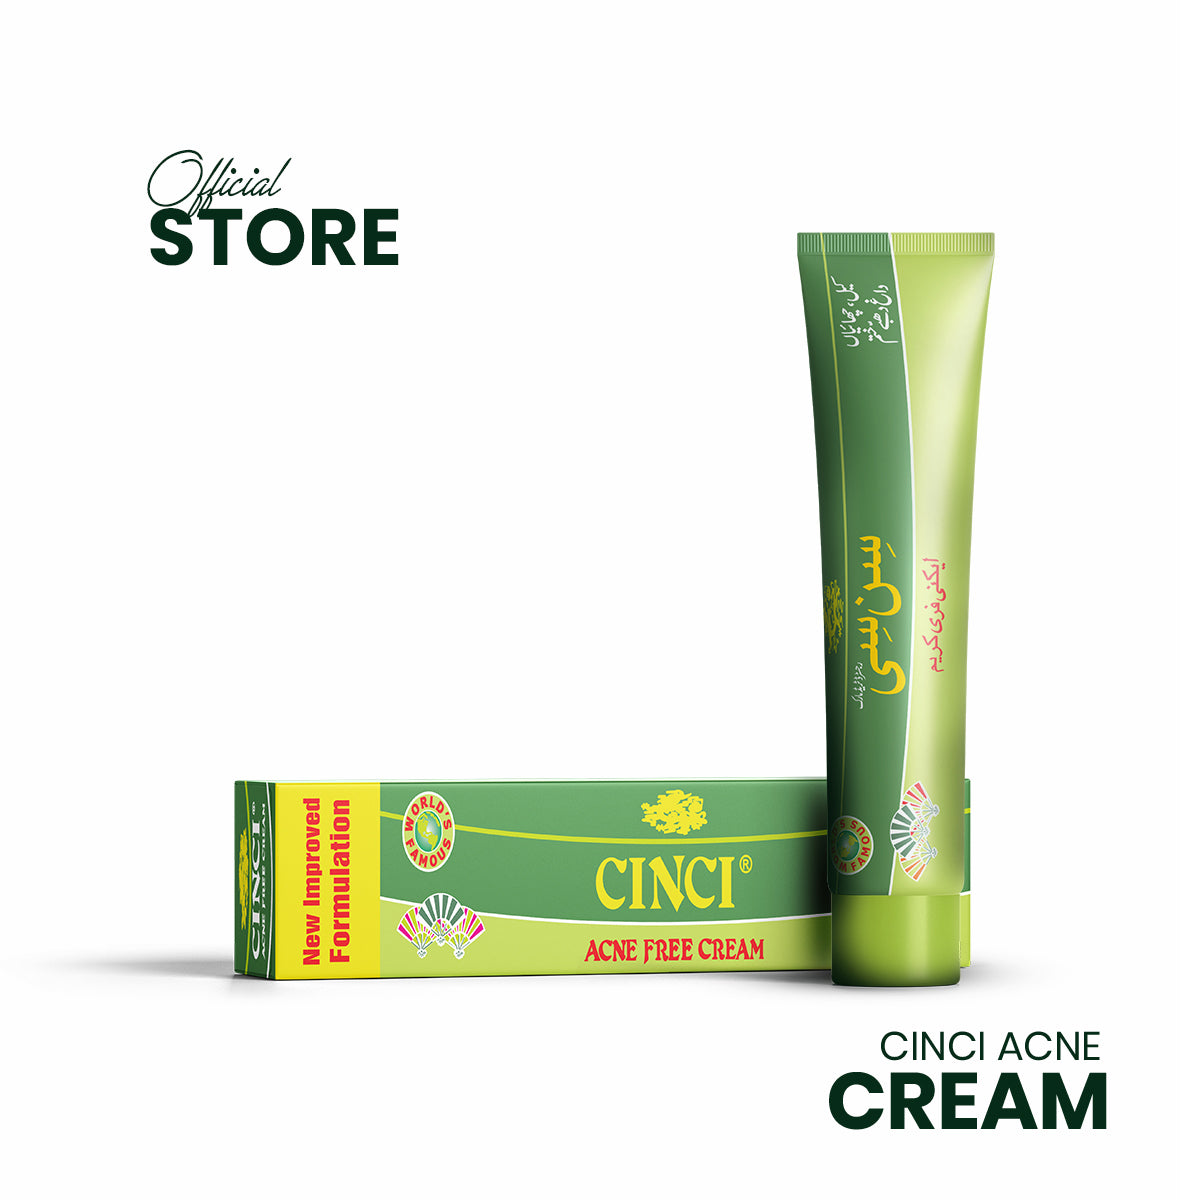 Cinci Acne Free Cream Benefits:  •	Acne Free •	Freckles Free •	Fungal Infection Treatment •	Remove Blackheads & Whiteheads (Seven Herbal ) CINCI Acne Free Cream I New Improved Formulation For Wrinkles, Acne, Freckles, and Fungal Infection Effective for Men & Women. Cinci acne cream is specially formulated to make your skin acne free, it deeply cleanses your pores and removes pimples, blackheads, and whiteheads, and makes your skin smooth and acne free.